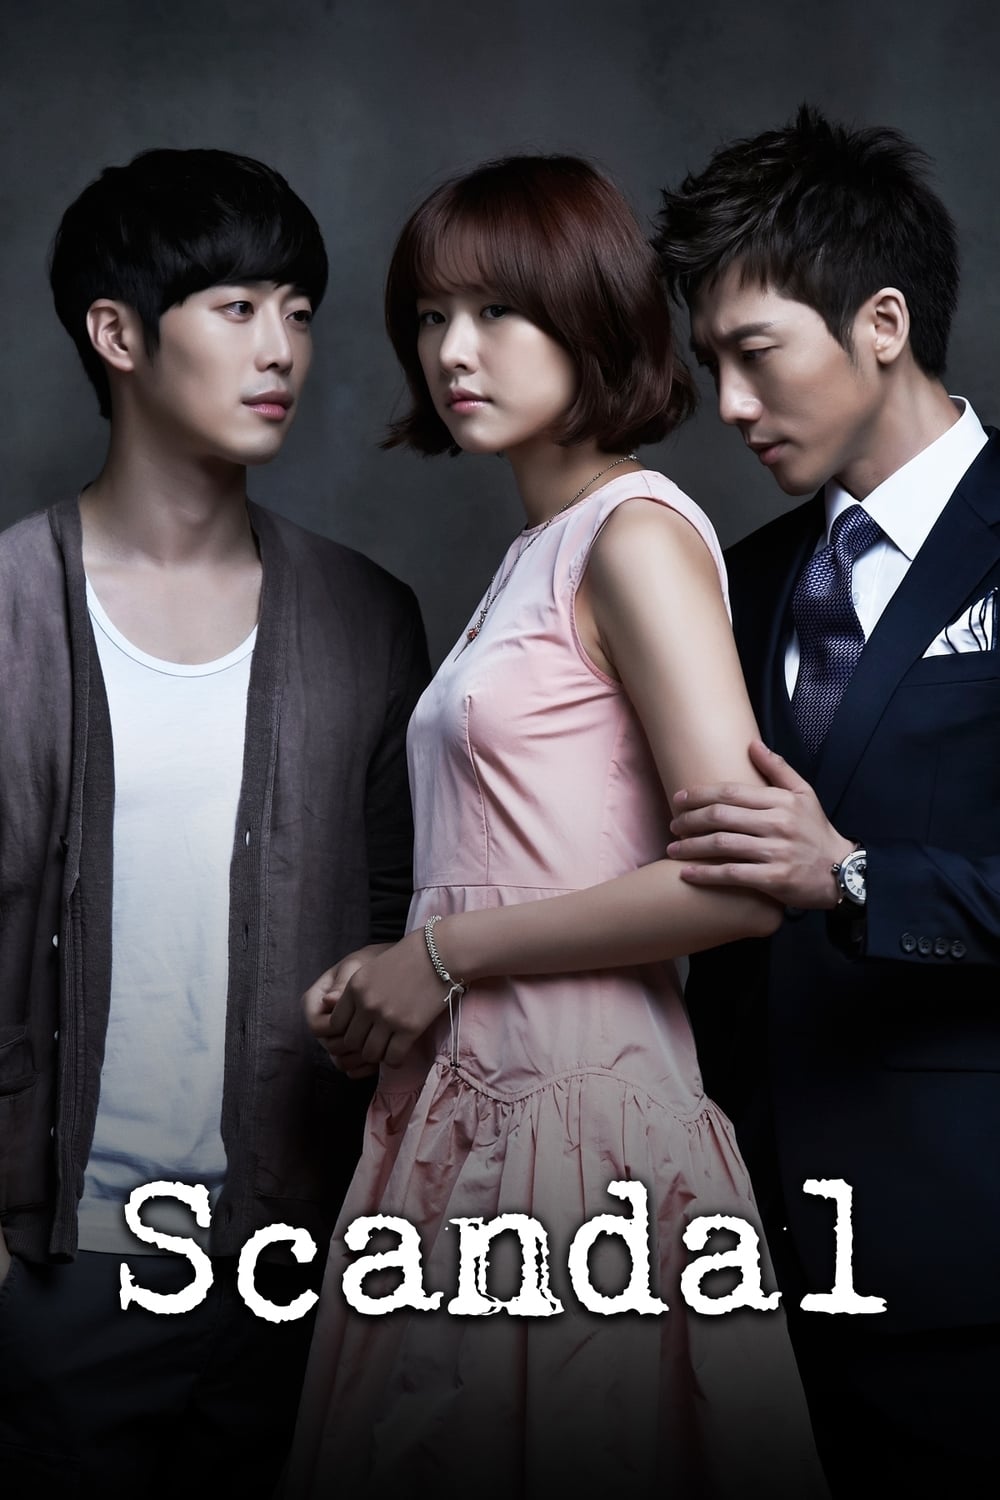 Scandal: A Shocking and Wrongful Incident (2013)